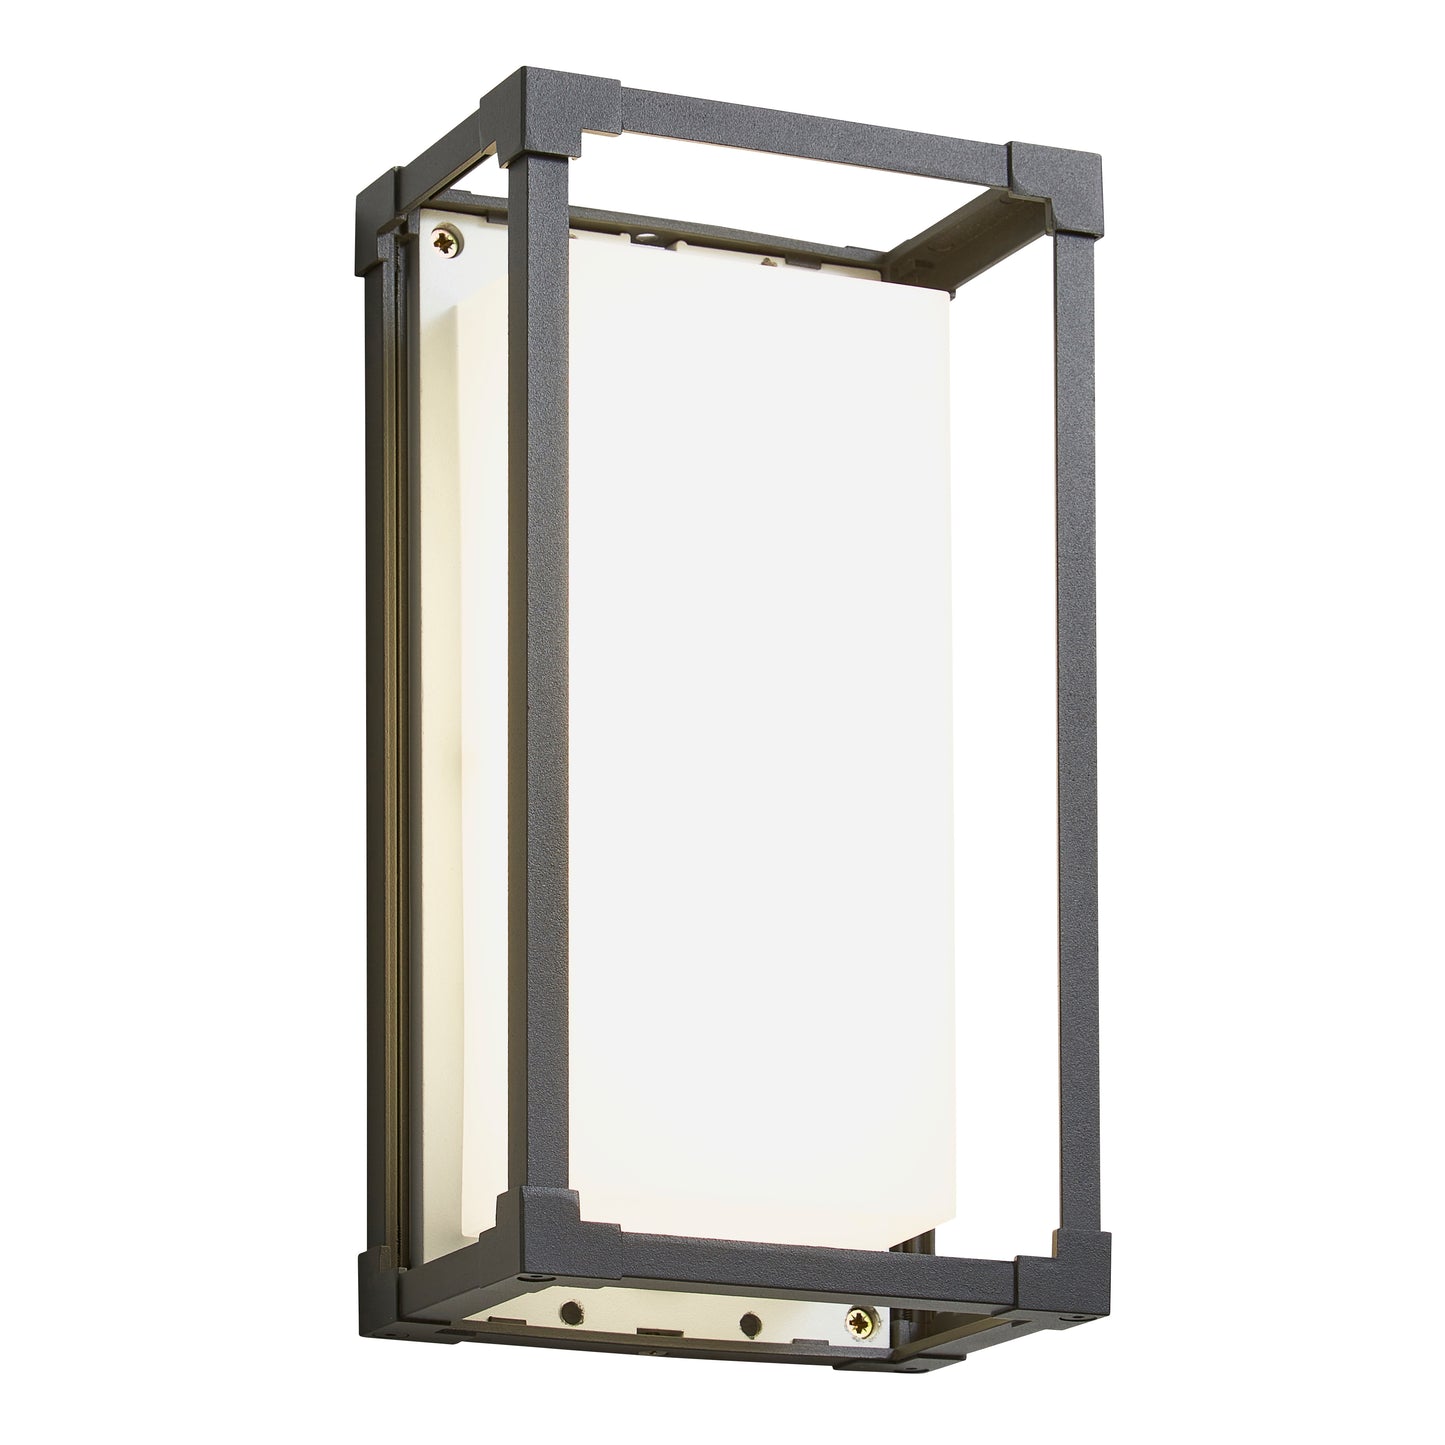 A modern take on a traditional design outdoor wall light perfect for adding style and security The traditional front-door lantern has had a modern make over in the form of our Jude  outdoor wall light with its square black aluminium construction and completed with opal polycarbonate diffuser this light this is sure to add an statement to any wall. 